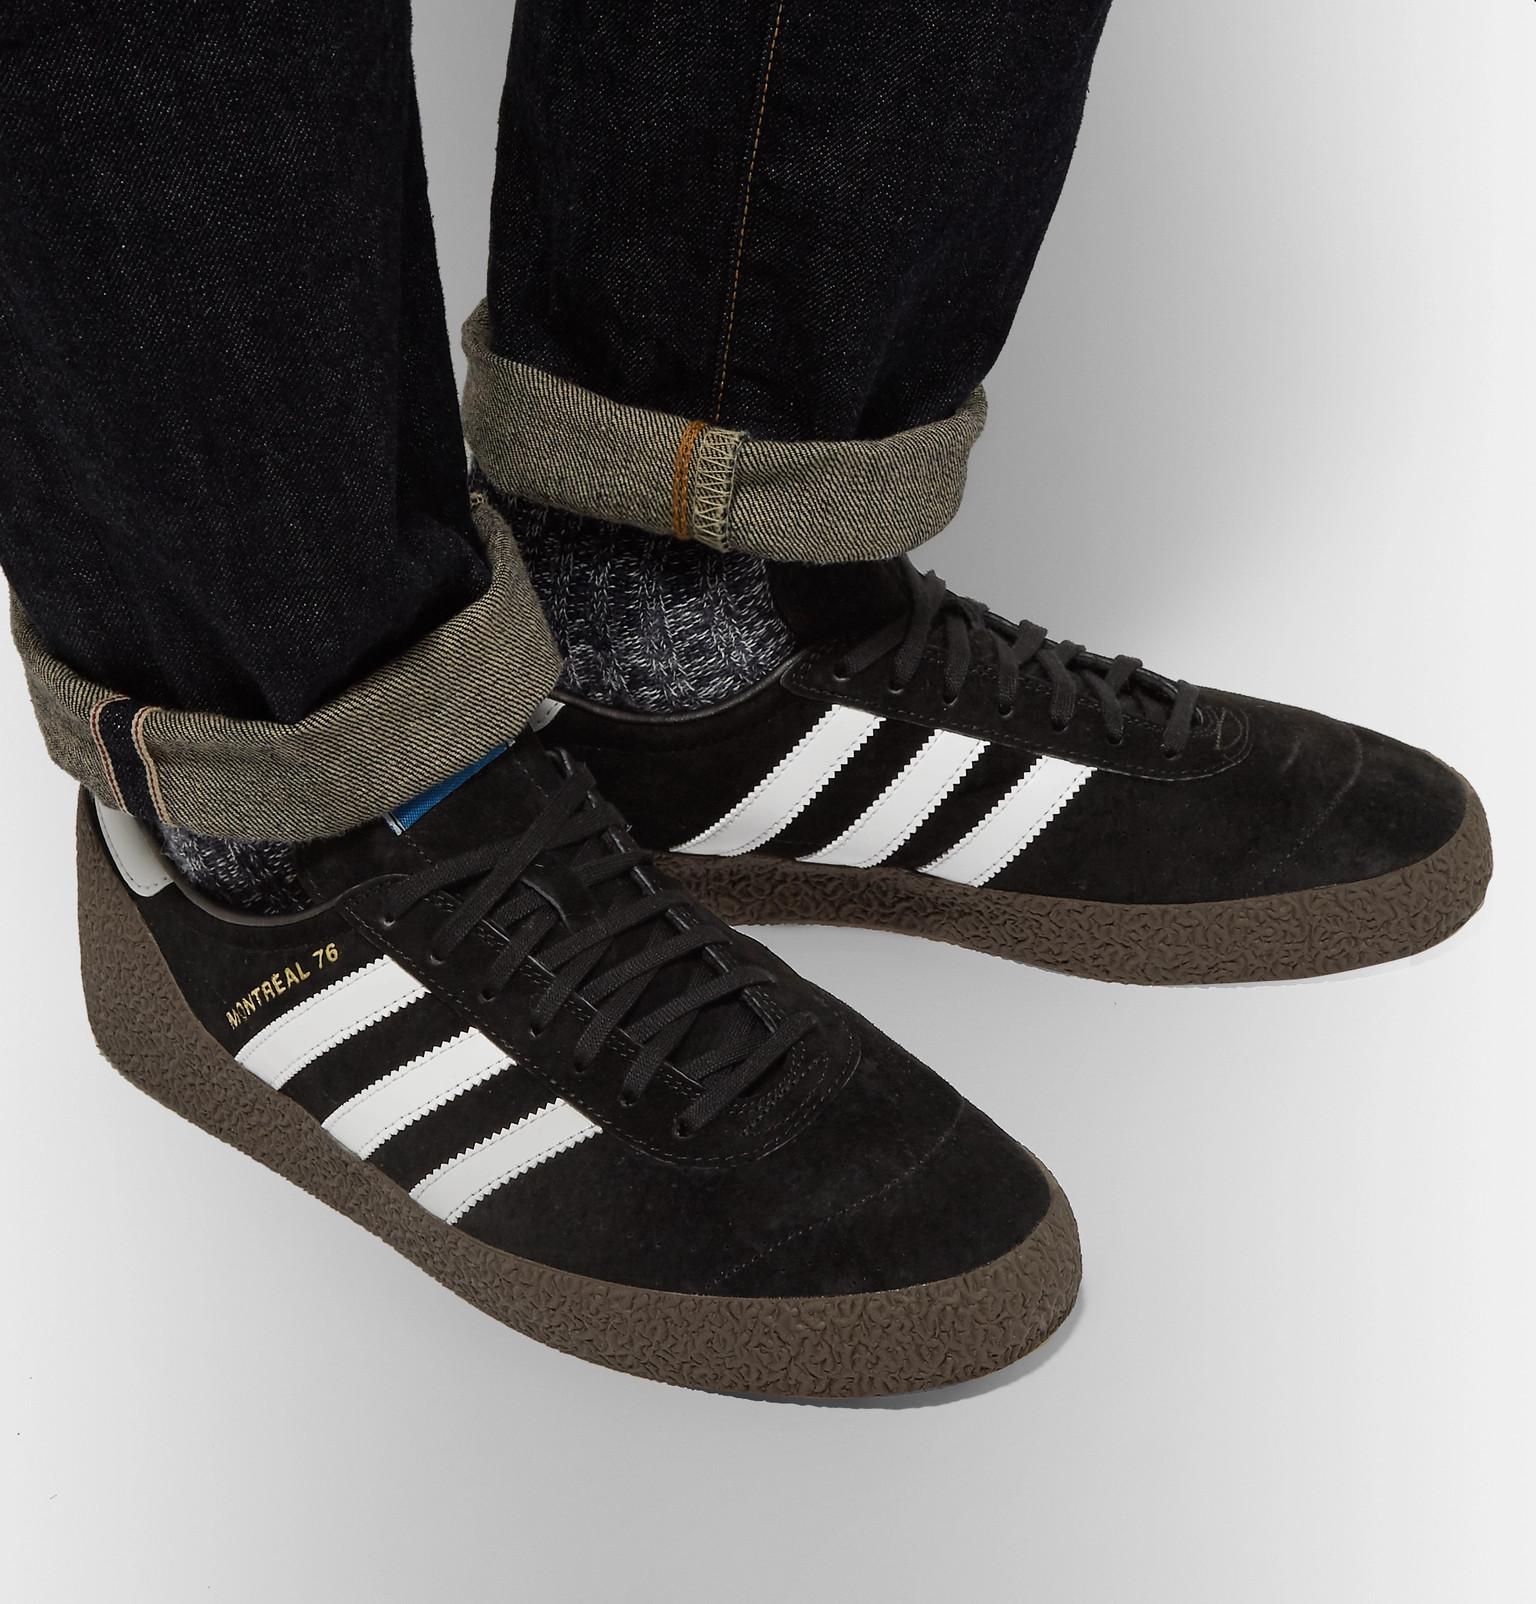 adidas Originals Montreal 76 Suede And Leather Sneakers in Black for ...